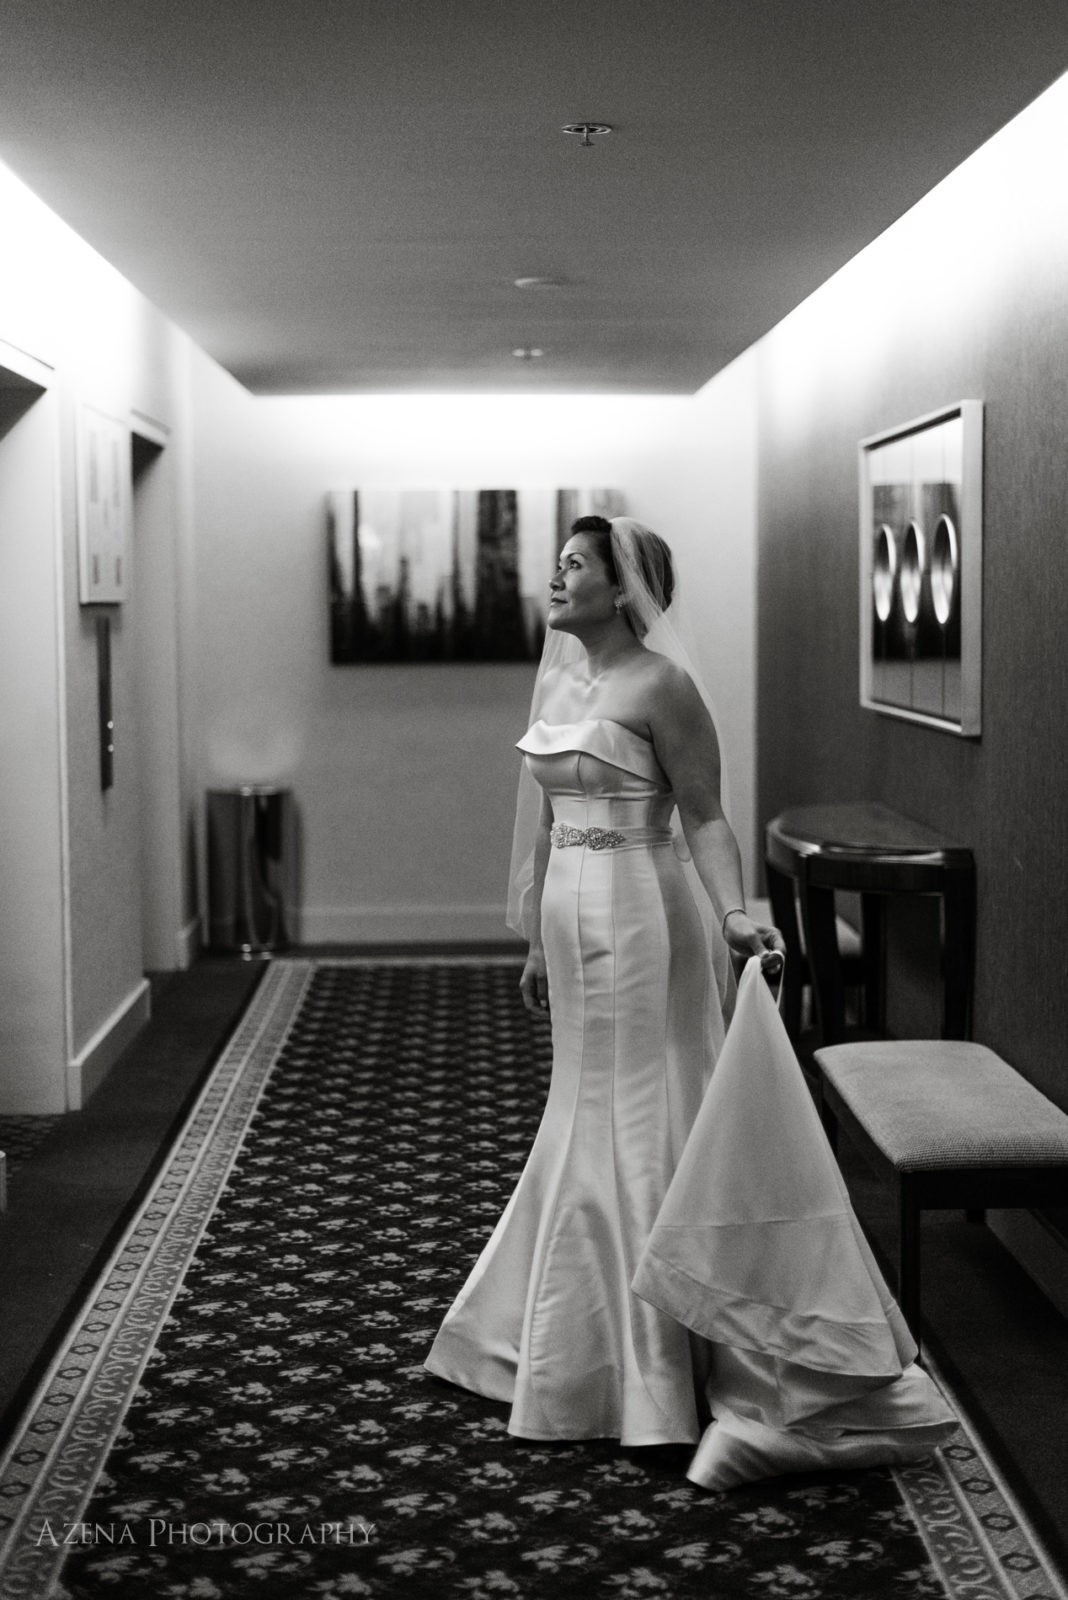 bride waiting for elevator. dramatic black and white photo.